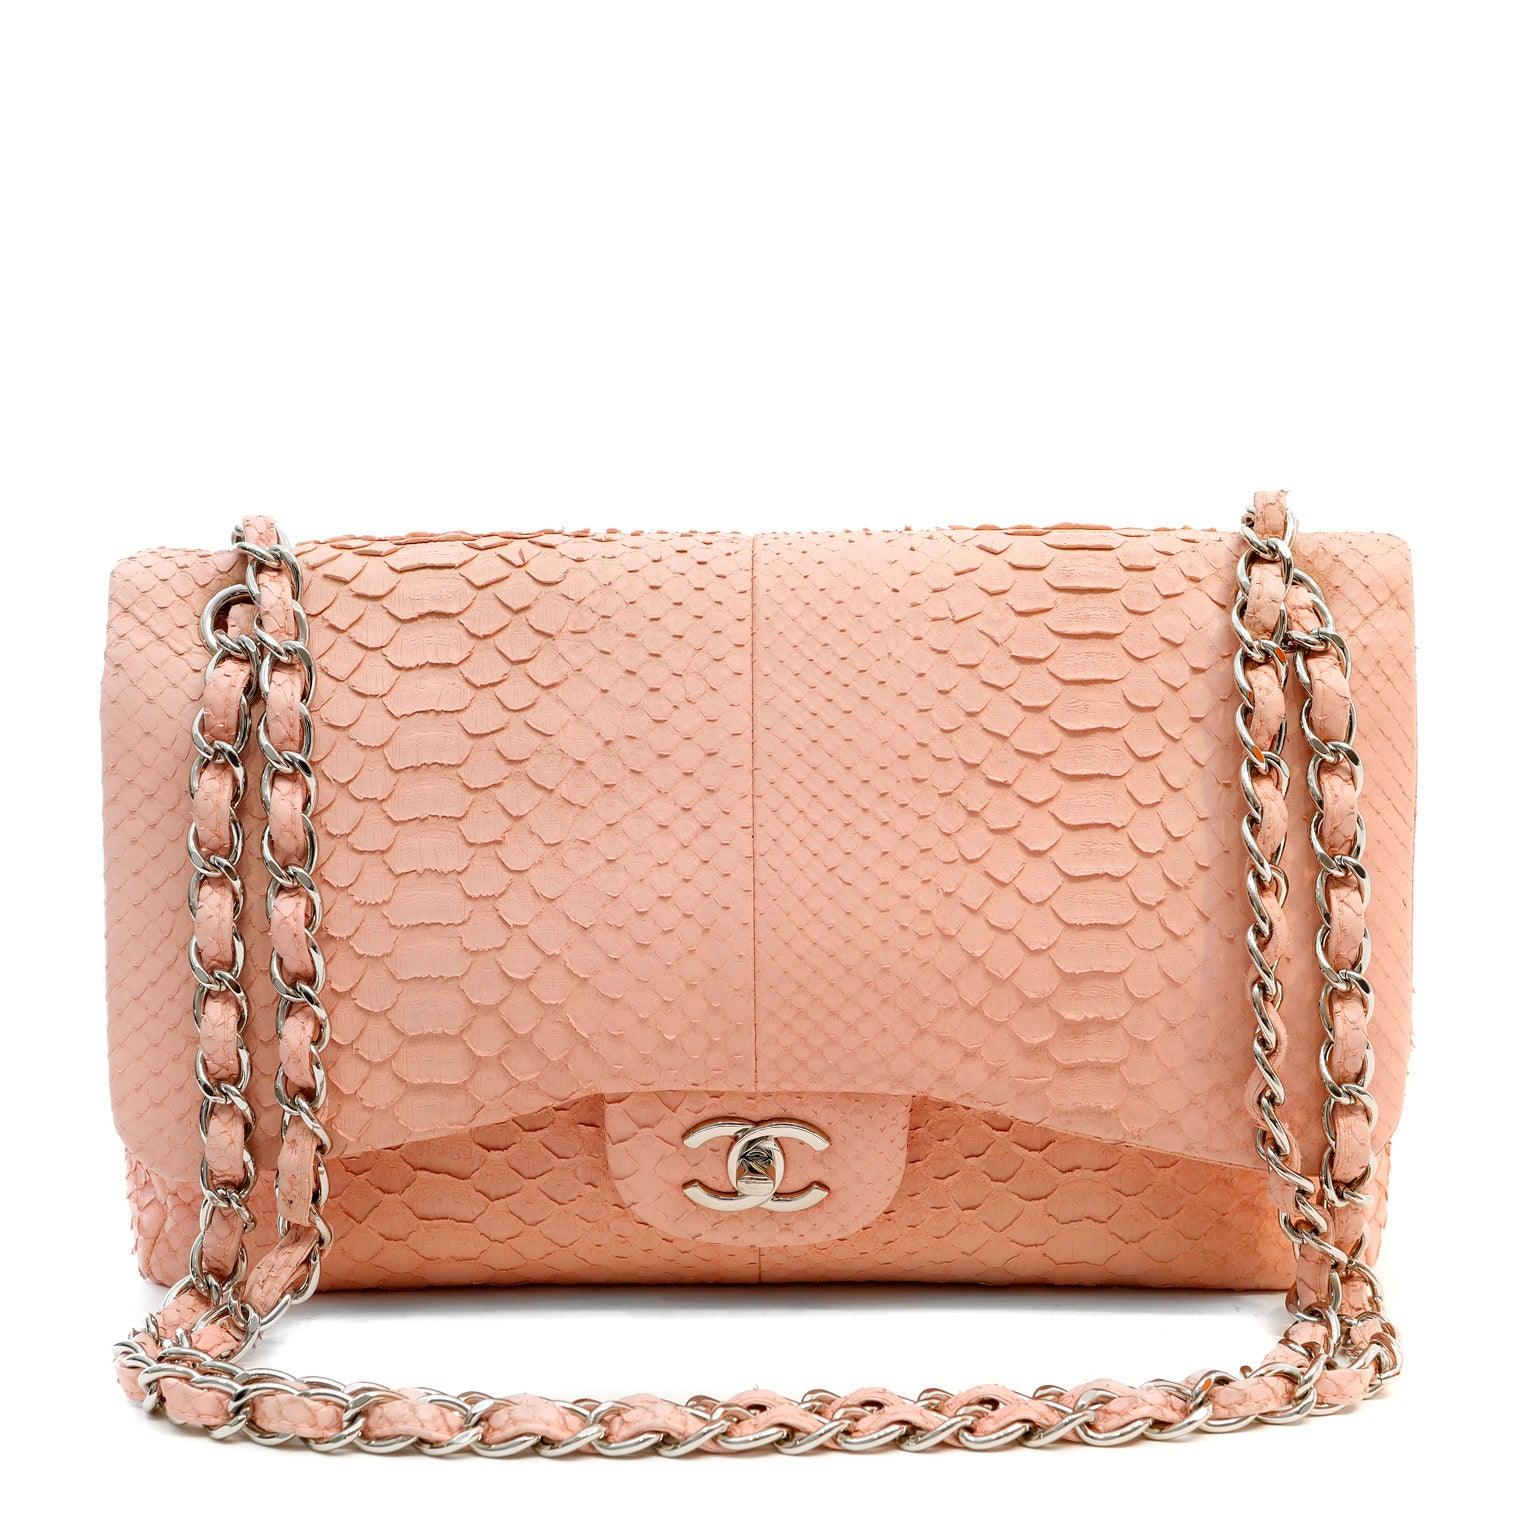 Get your hands on this stunning Chanel Bubblegum Pink Python Jumbo Classic  handbag with Silver Hardware – Only Authentics